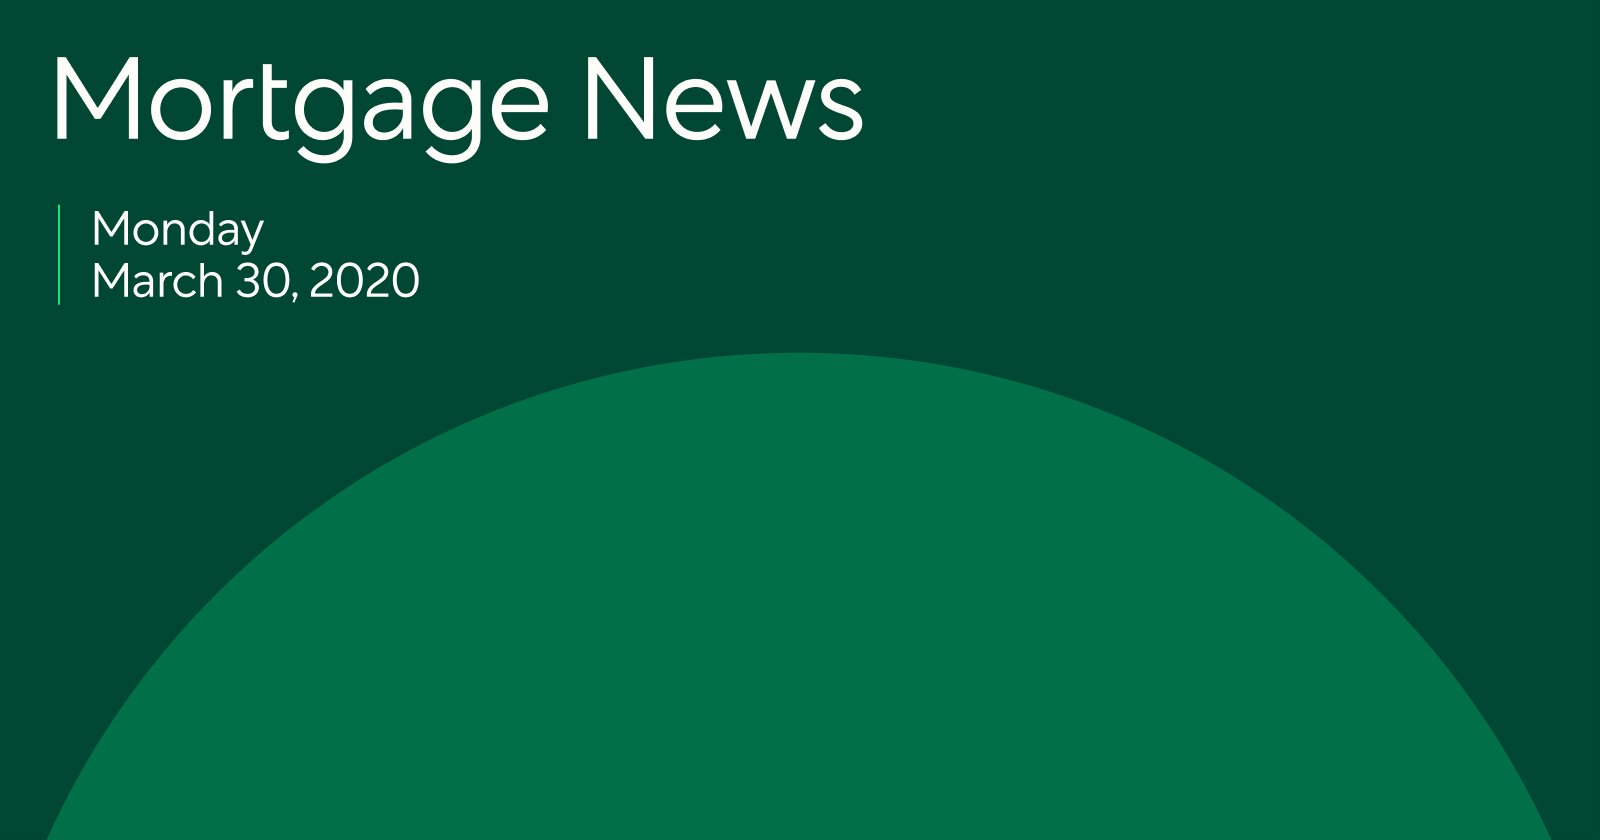  Mortgage News: Published by Better March 30, 2020